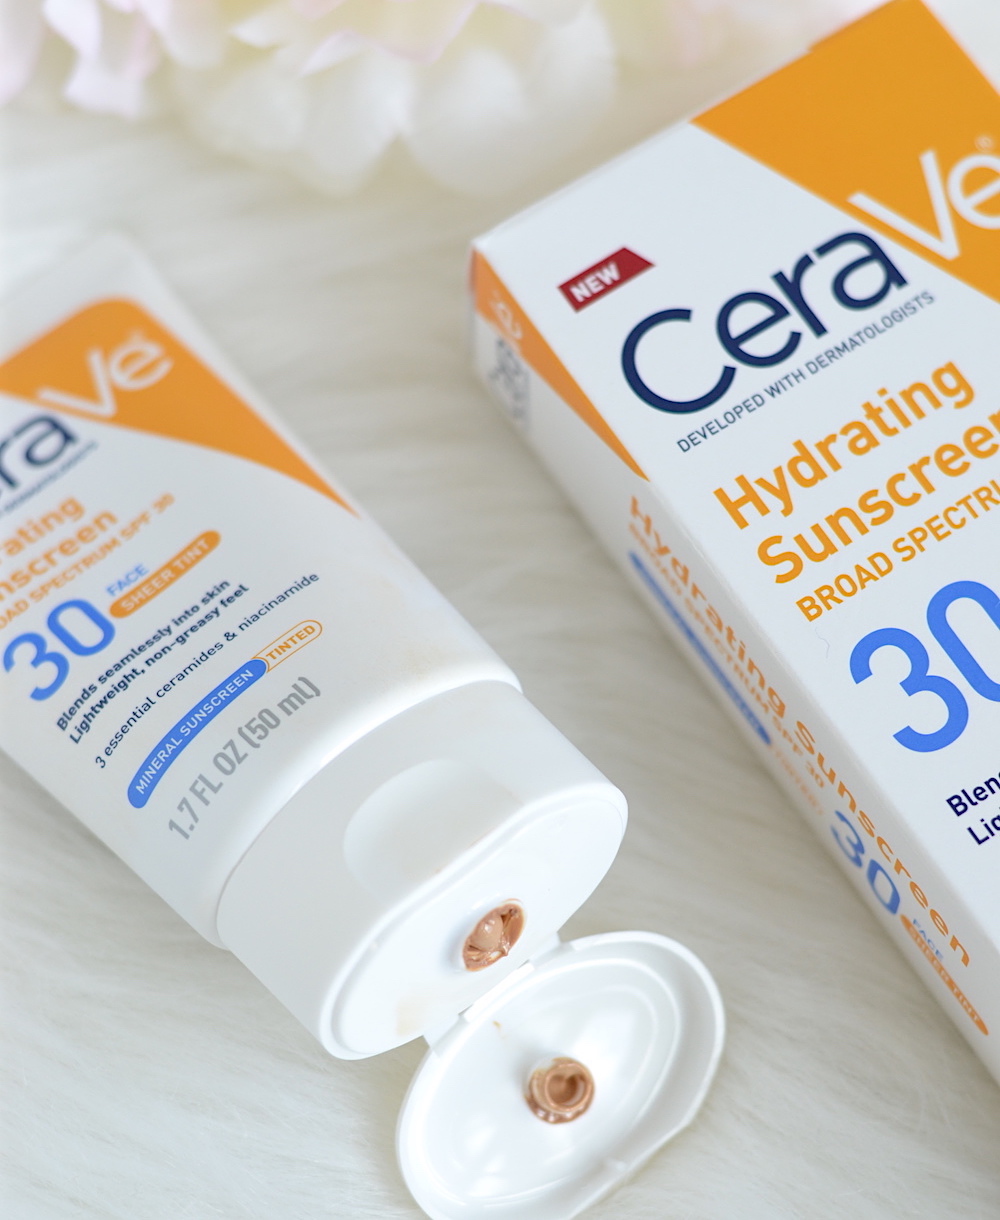 Cerave Tinted Sunscreen SPF 30